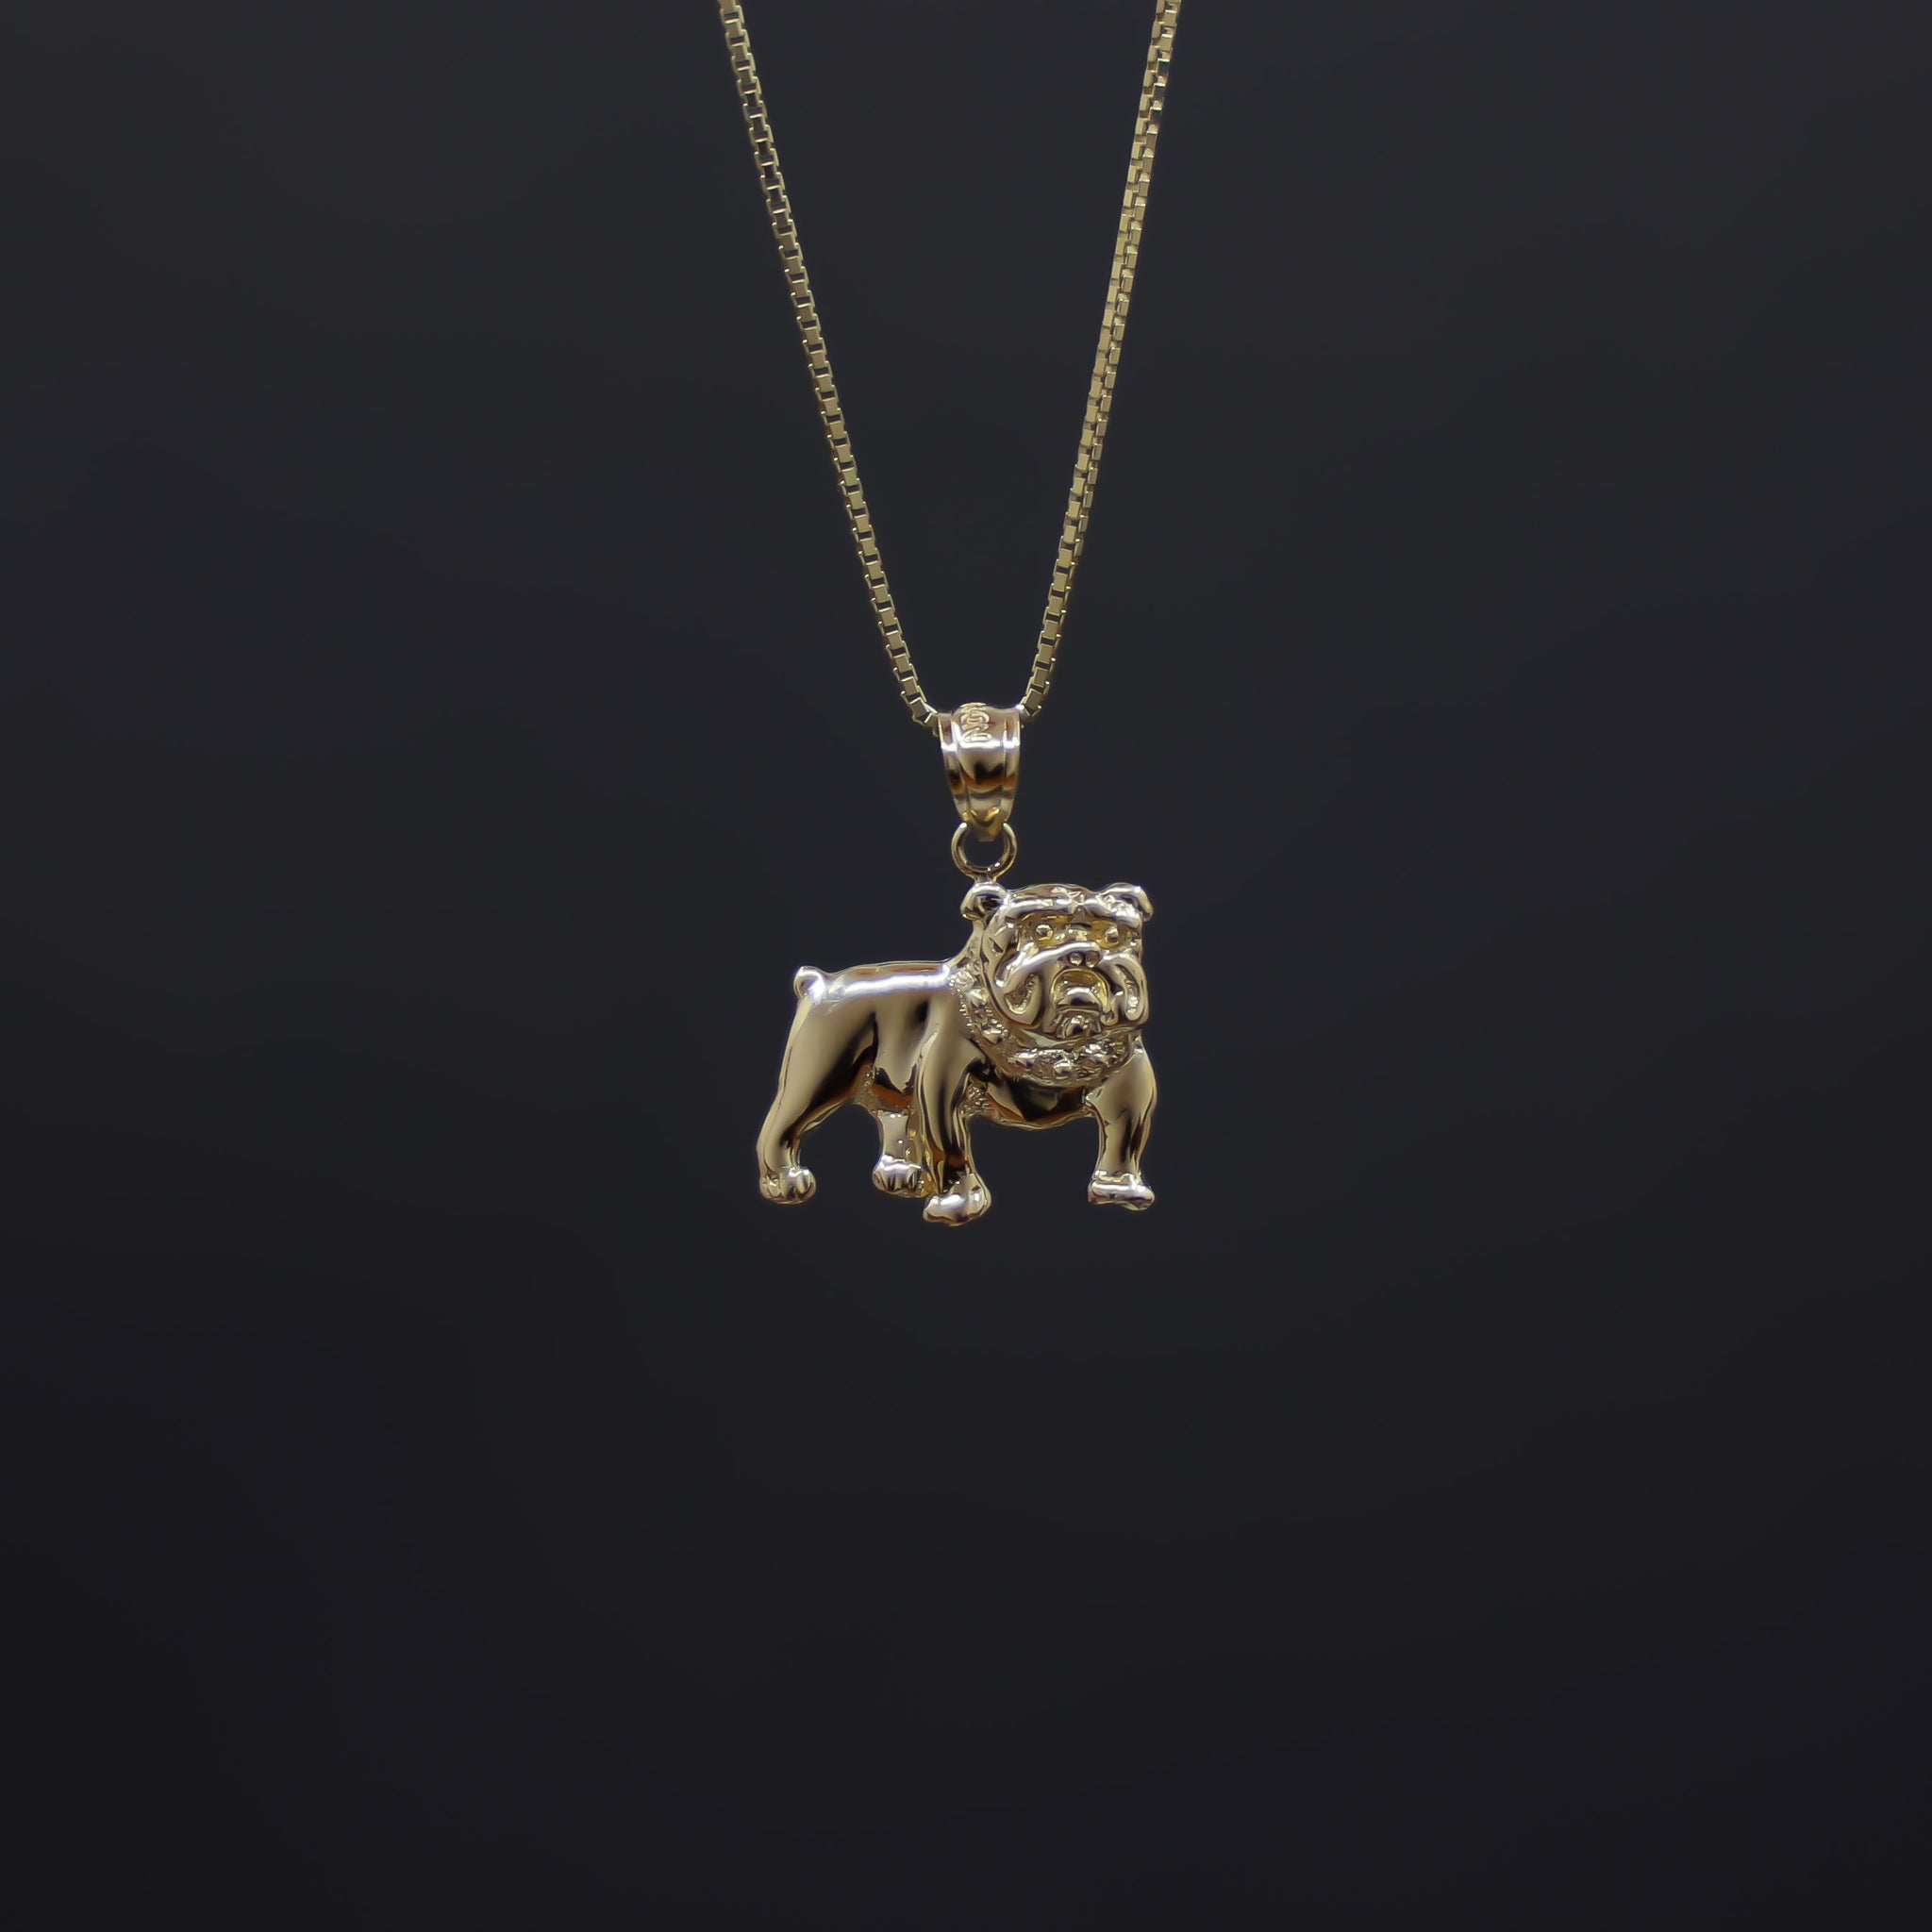 French Bulldog Necklace - Sterling Silver Jewelry - Gold - Rose Gold -  Engrave | eBay